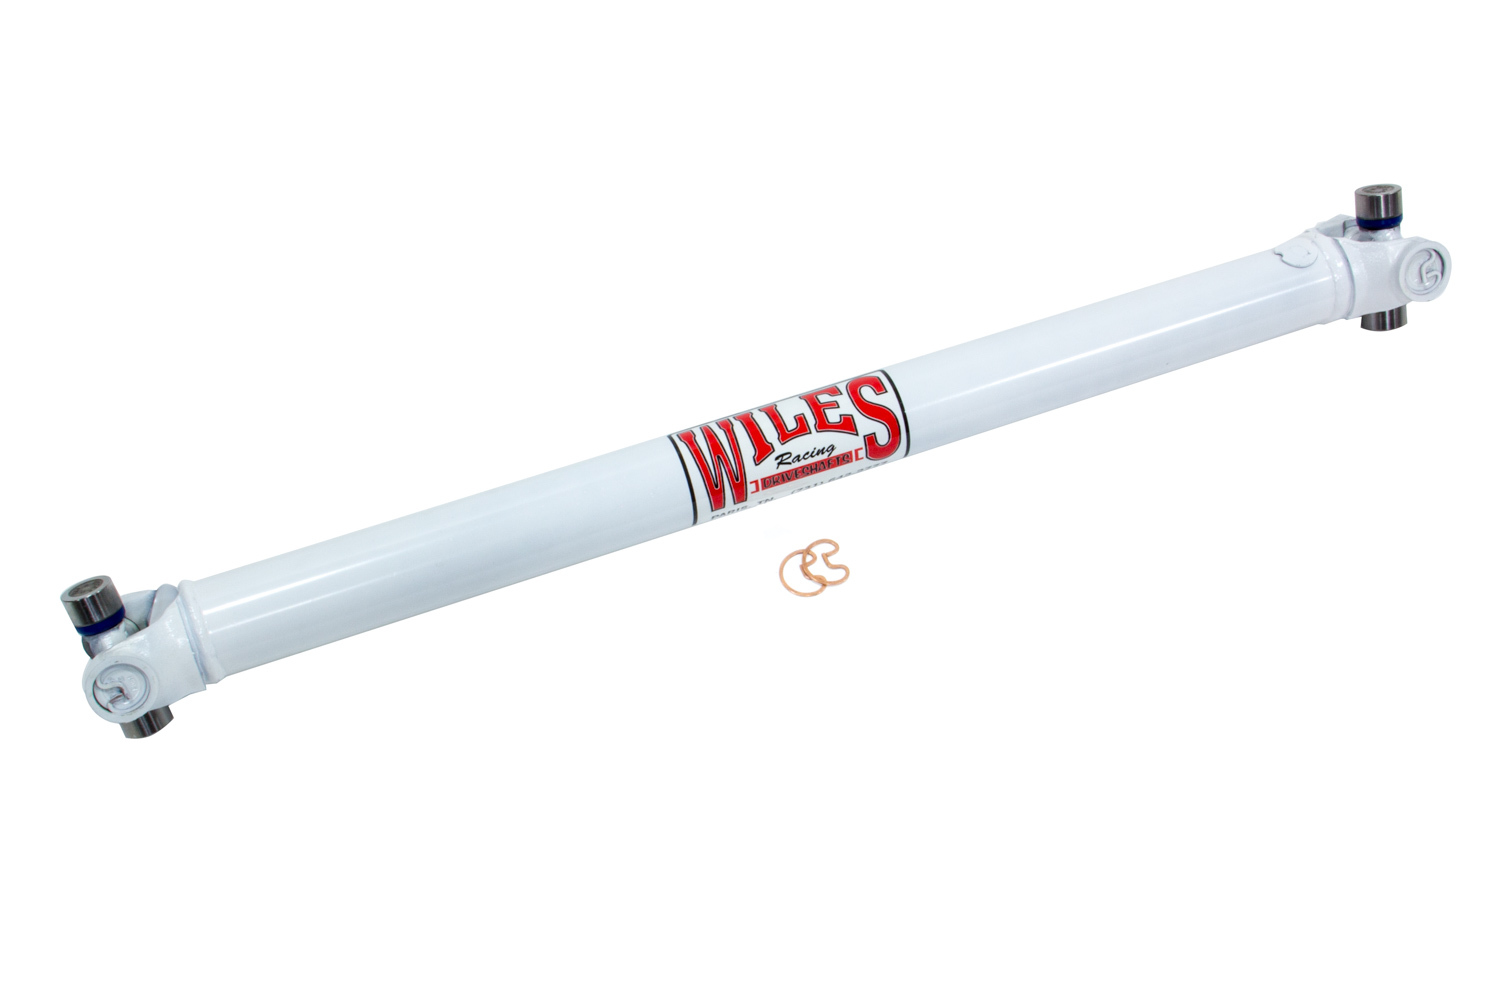 Wiles Driveshaft S295390 Drive Shaft, 39 in Long, 2 in OD, 1310 U-Joints, Steel, White Paint, Universal, Each